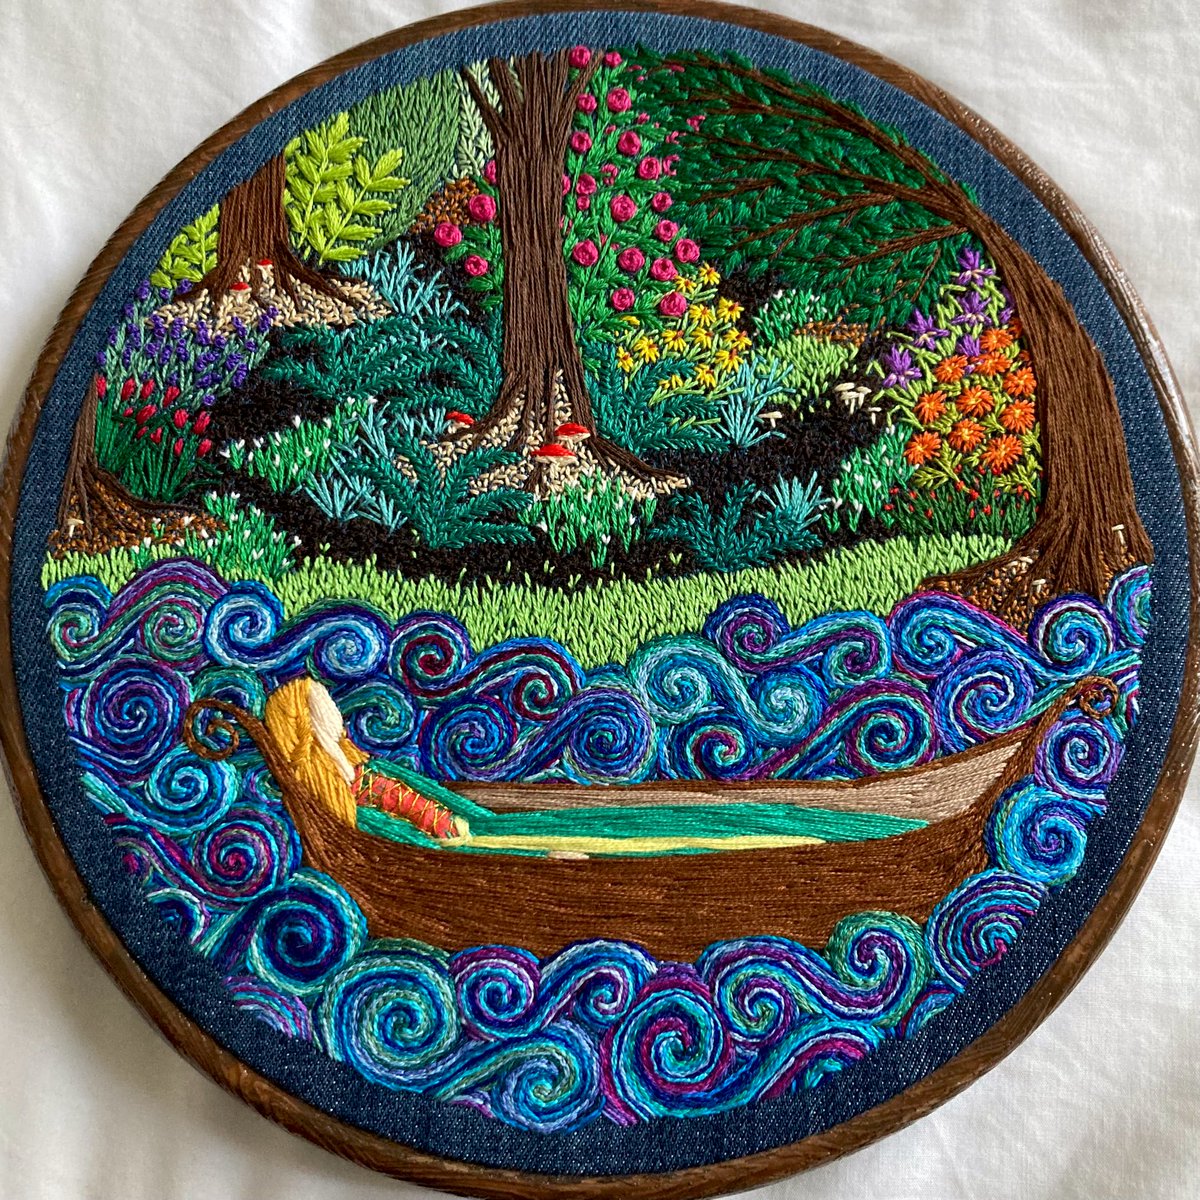 Well the wait is over. Here is my latest embroidery. It’s taken far longer than my usual but those swirls do take an age to stitch! Feel free to drift away… 😉🧵🌿🌺🌀
*completely freehand stitched, no patterns, paint or guide, just threads 🪡 #stitchedart  #thesewingsongbird